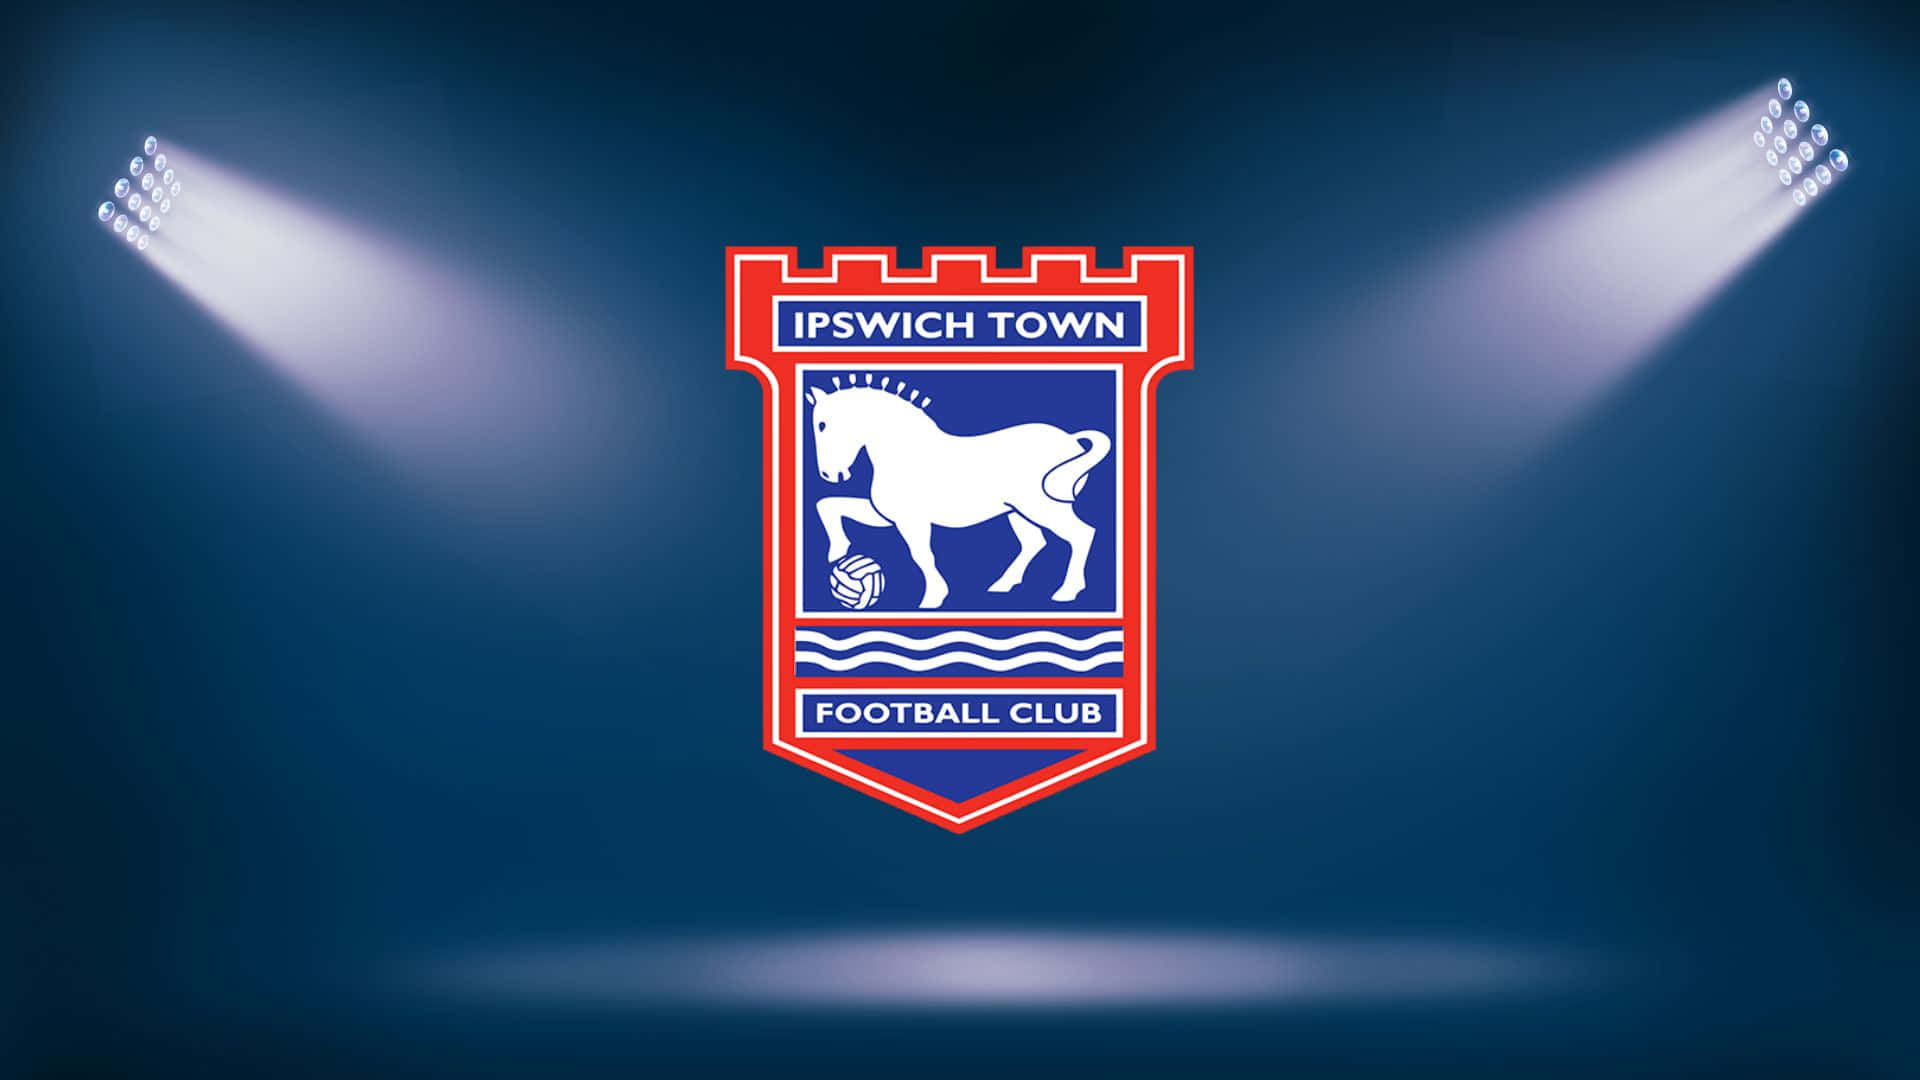 Ipswich Town players celebrating on the field Wallpaper